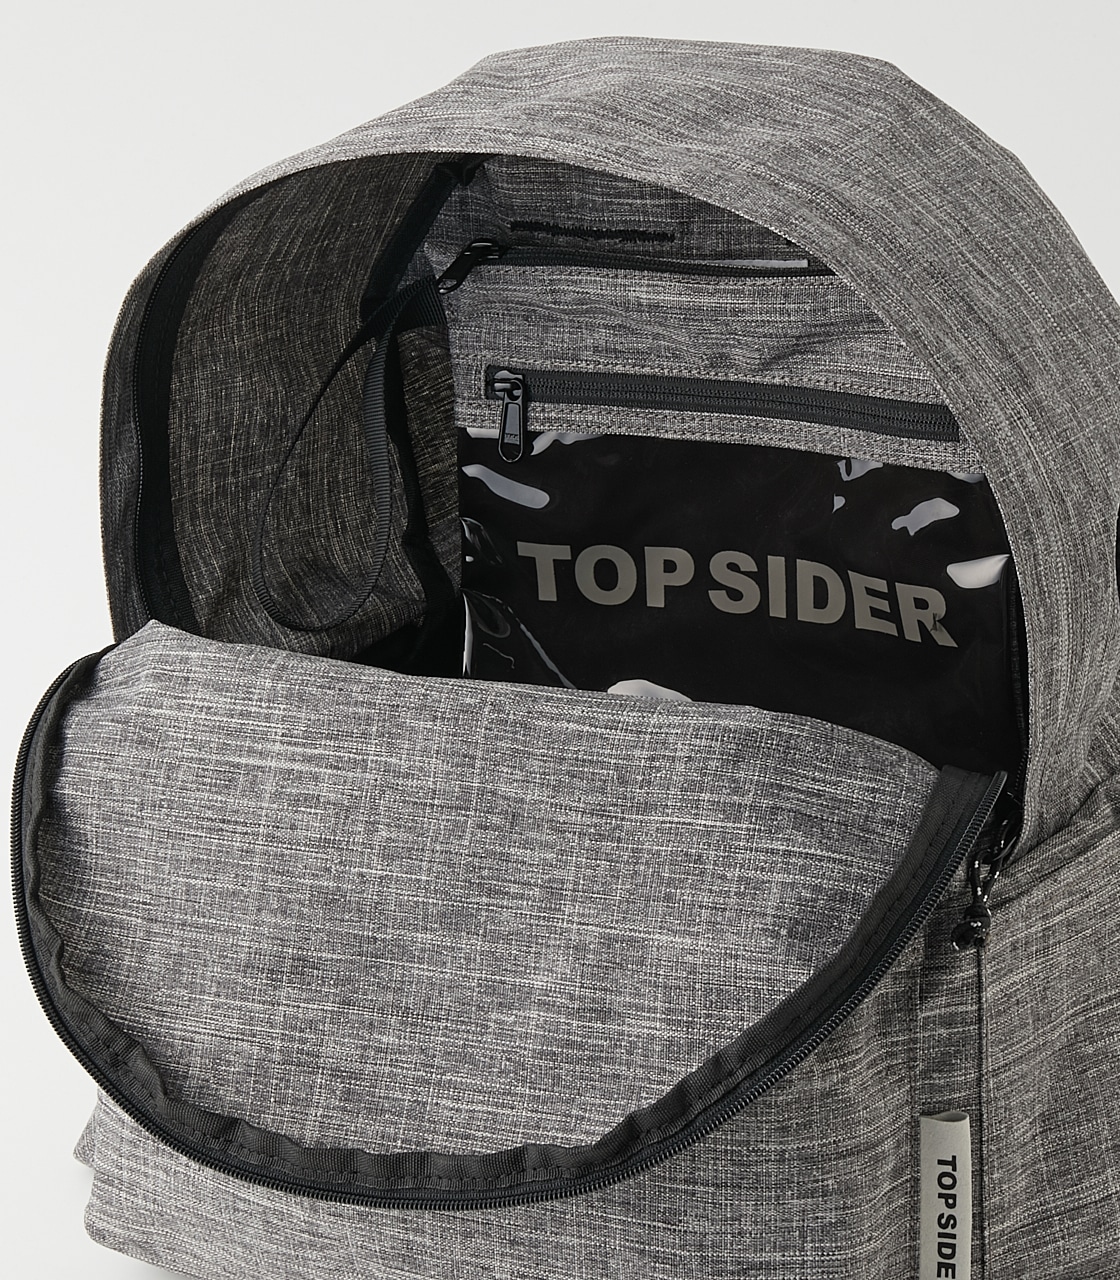 TOP SIDER×AZUL BACKPACK/TOP SIDER×AZULバックパック 詳細画像 L/GRY 6